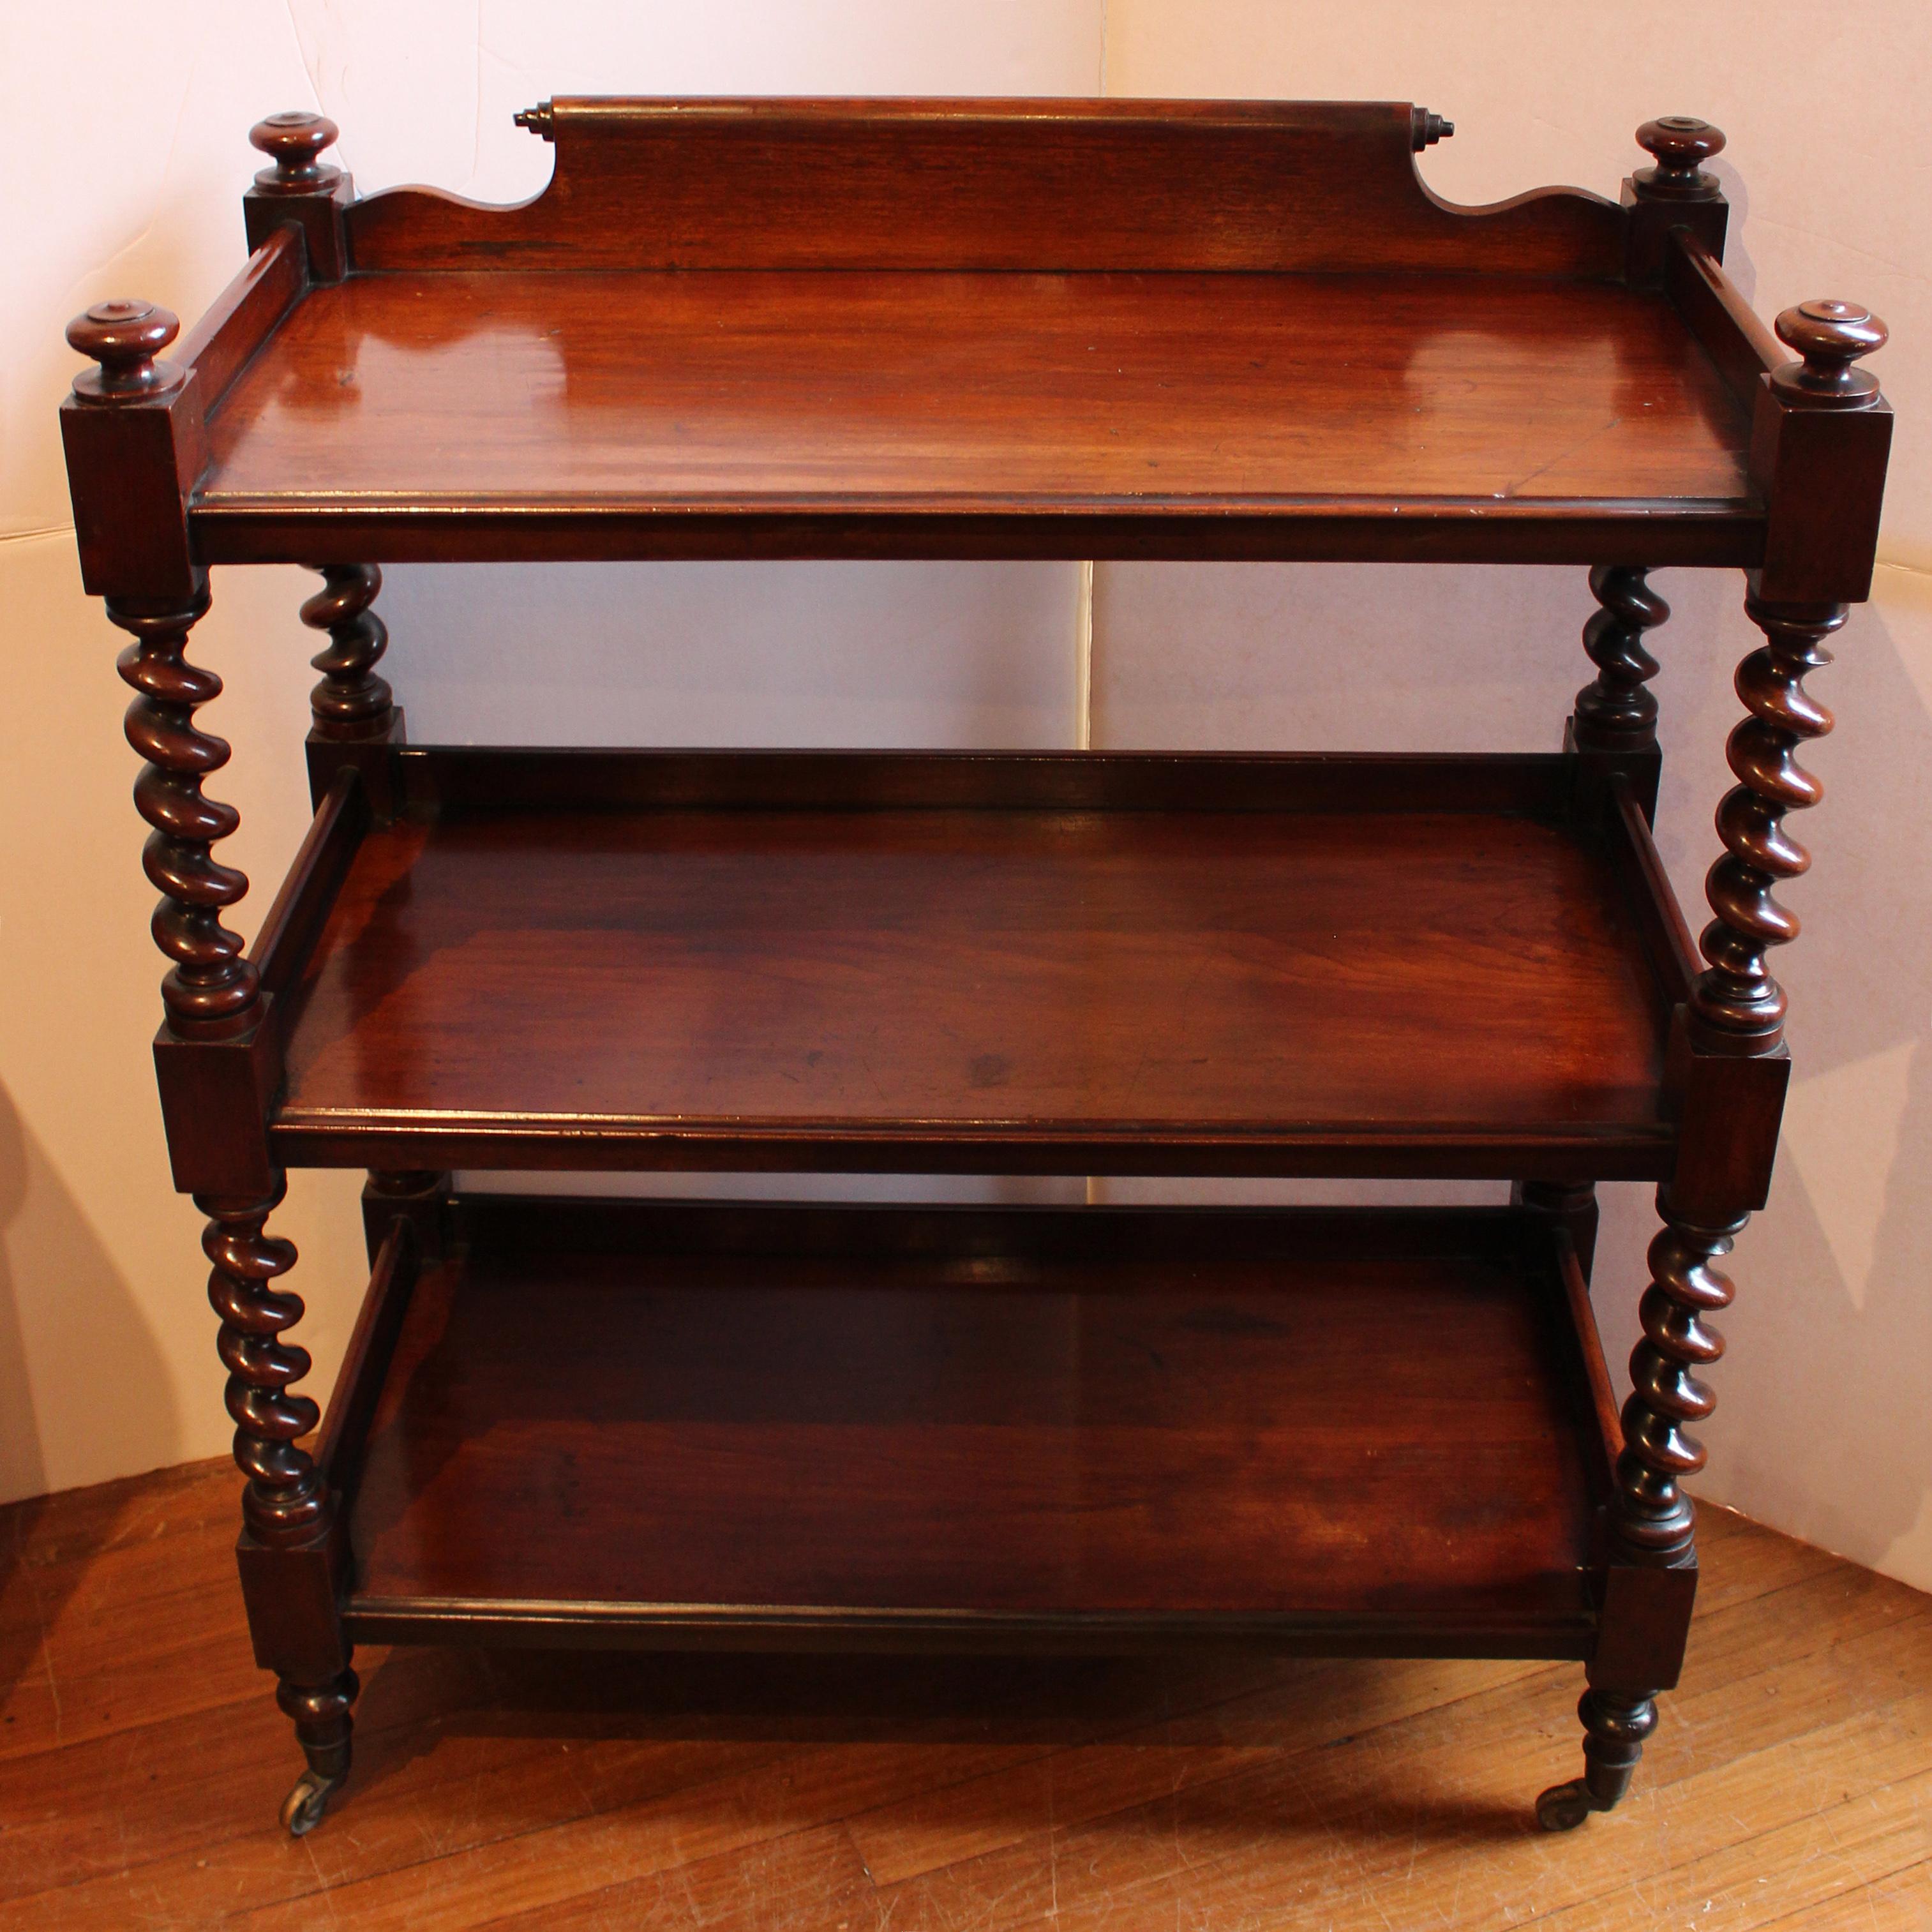 William IV c.1830 etagere serving buffet or buffet trolley. English, mahogany, 3-tiers. Outstanding quality. Shaped backsplat with conical carving at the rail ends, molded edges, barley twist uprights ending in brass caps & casters, surmounted by